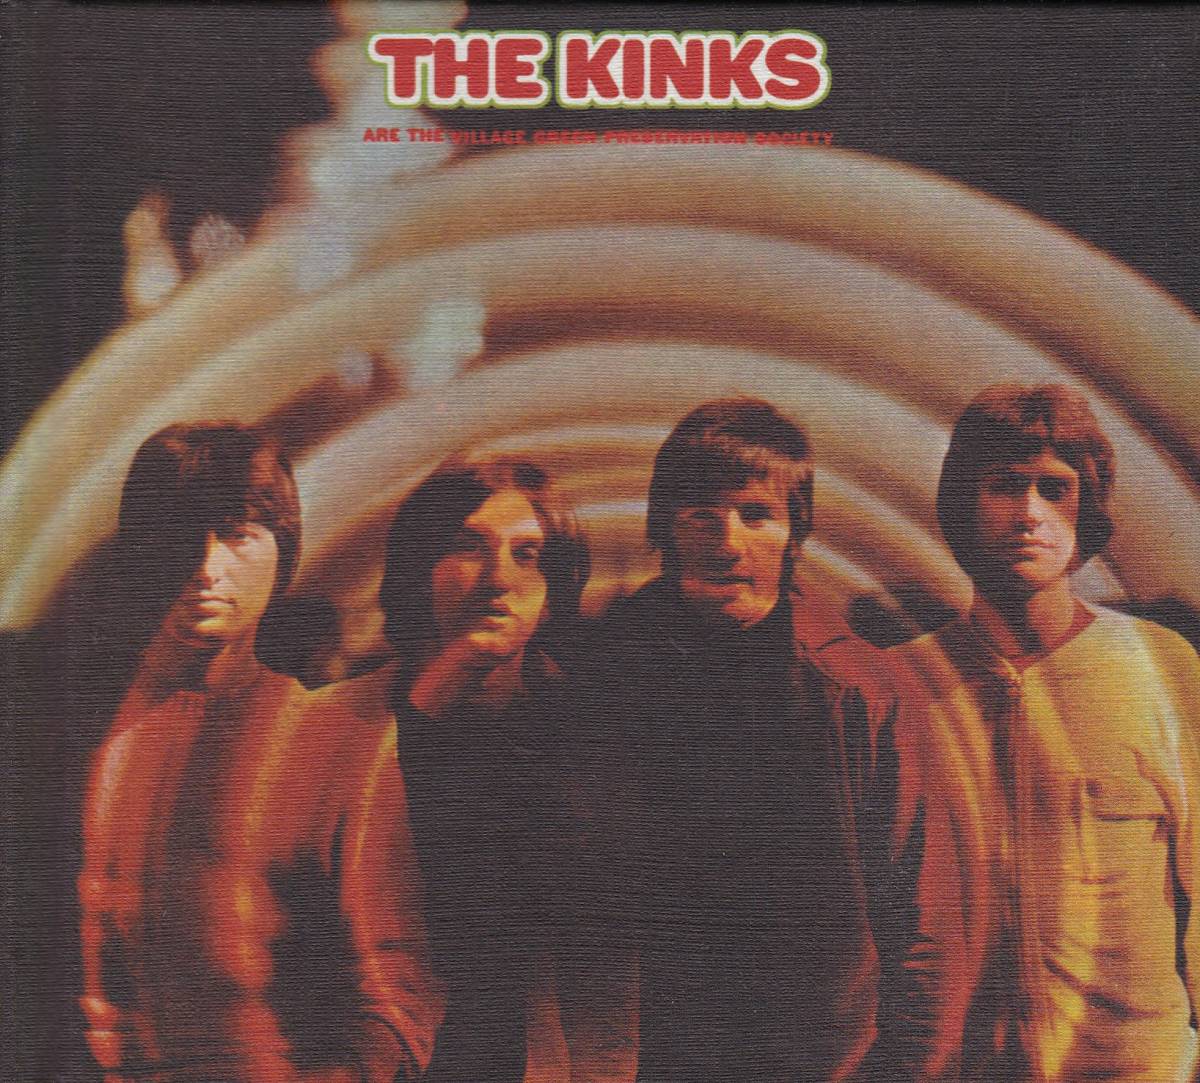 ★THE KINKS:THE VILLAGE GREEN PRESERVATION SOCIETY☆STEREO &amp; MONO2018 РЕМАСТЕР + БОНУС-ТРЕКИ Direct Import Edition 2CD★